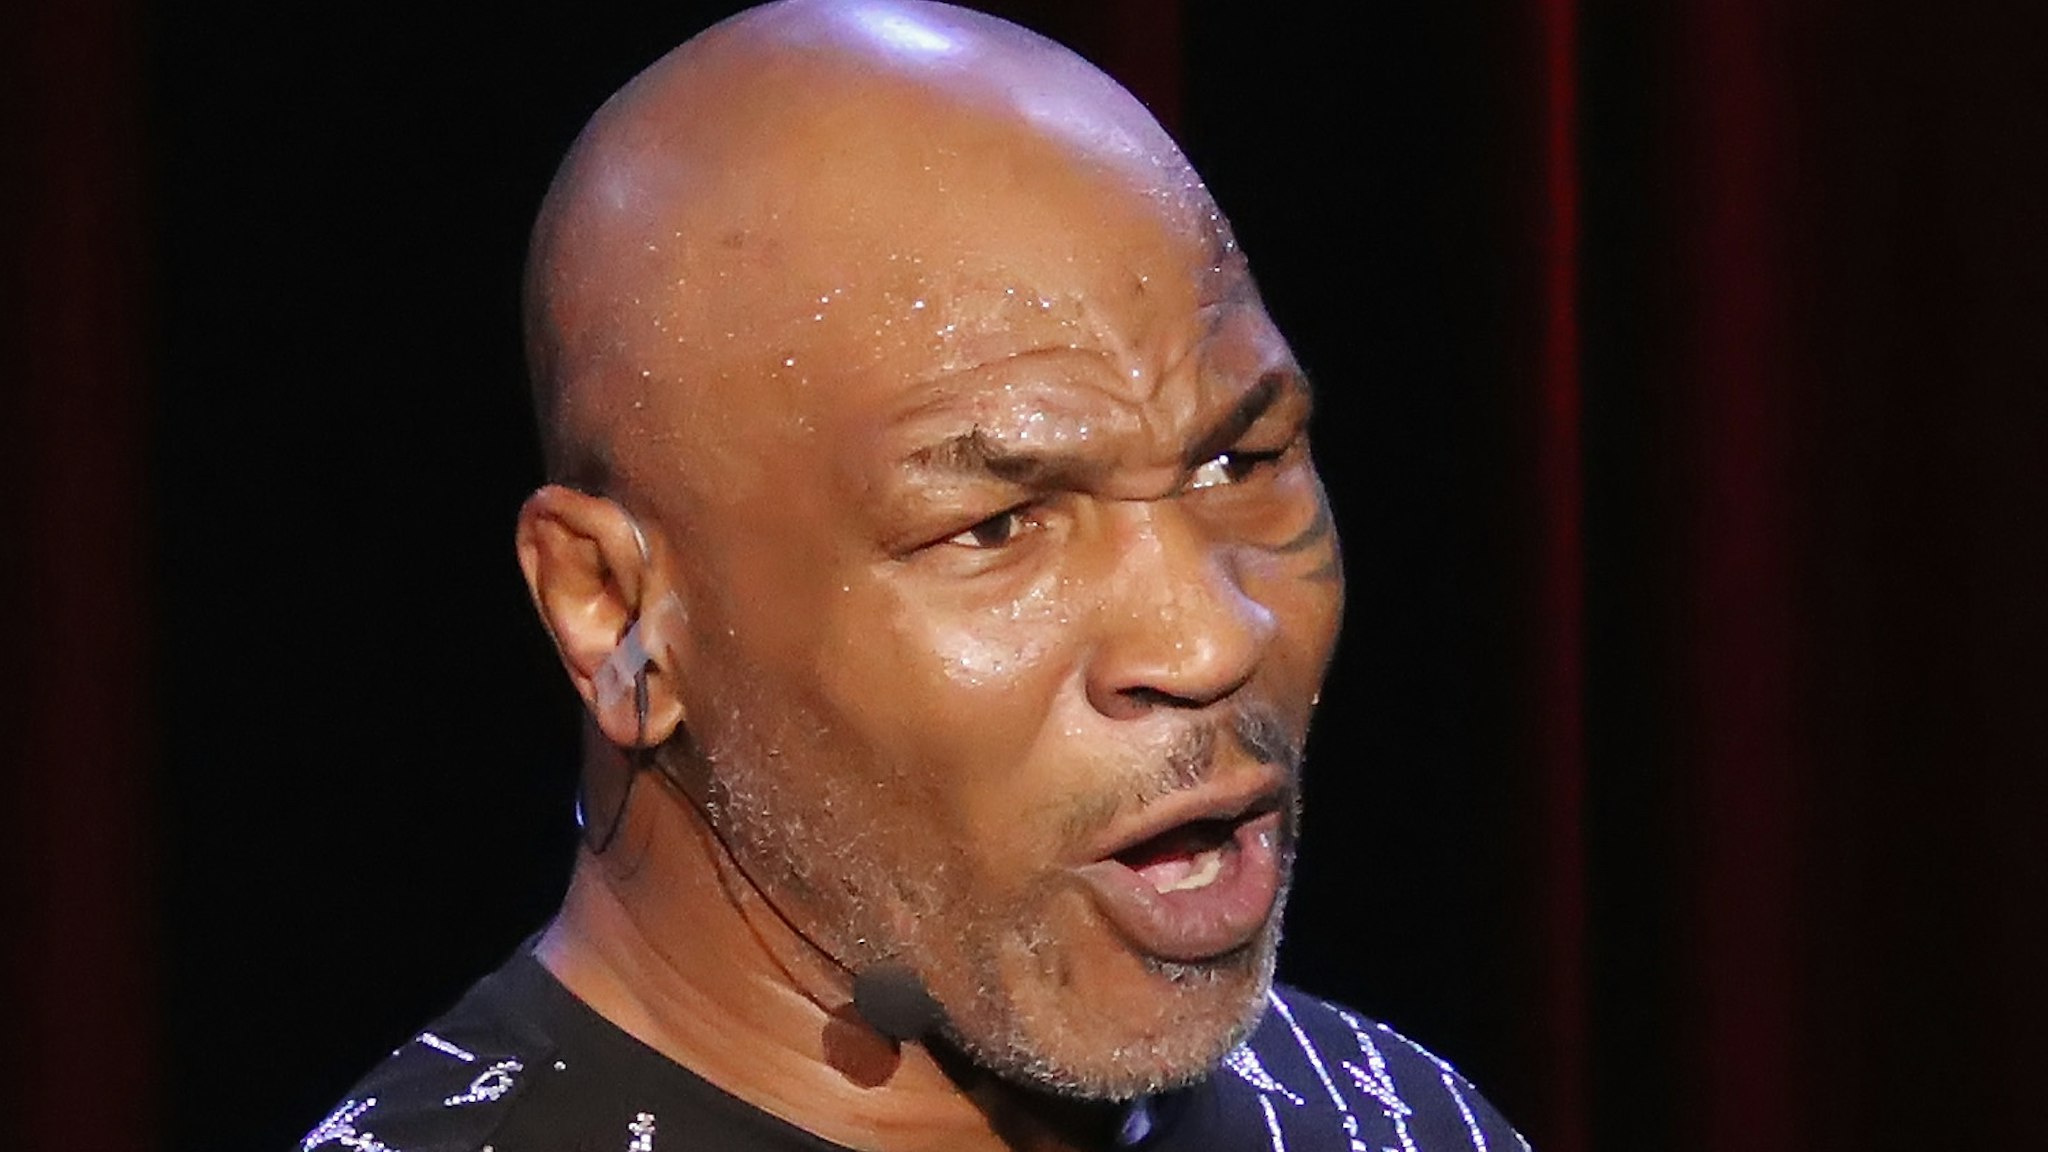 Mike Tyson performs his one man show "Undisputed Truth" in the Music Box at the Borgata on March 6, 2020 in Atlantic City, New Jersey.